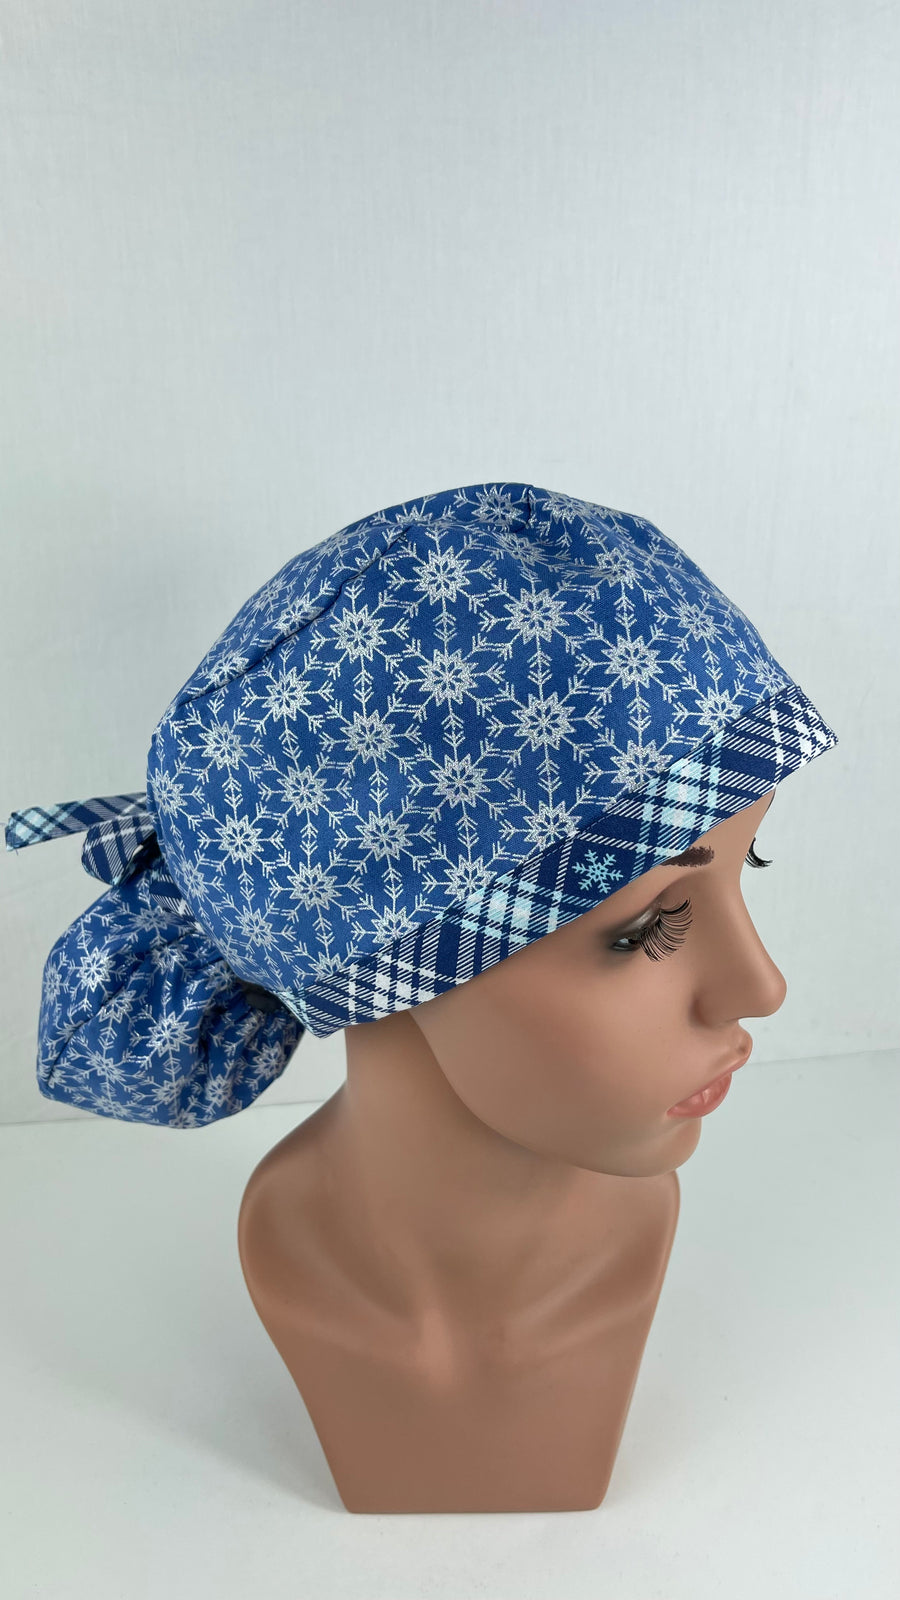 Silver Snowflakes Ponytail Hat